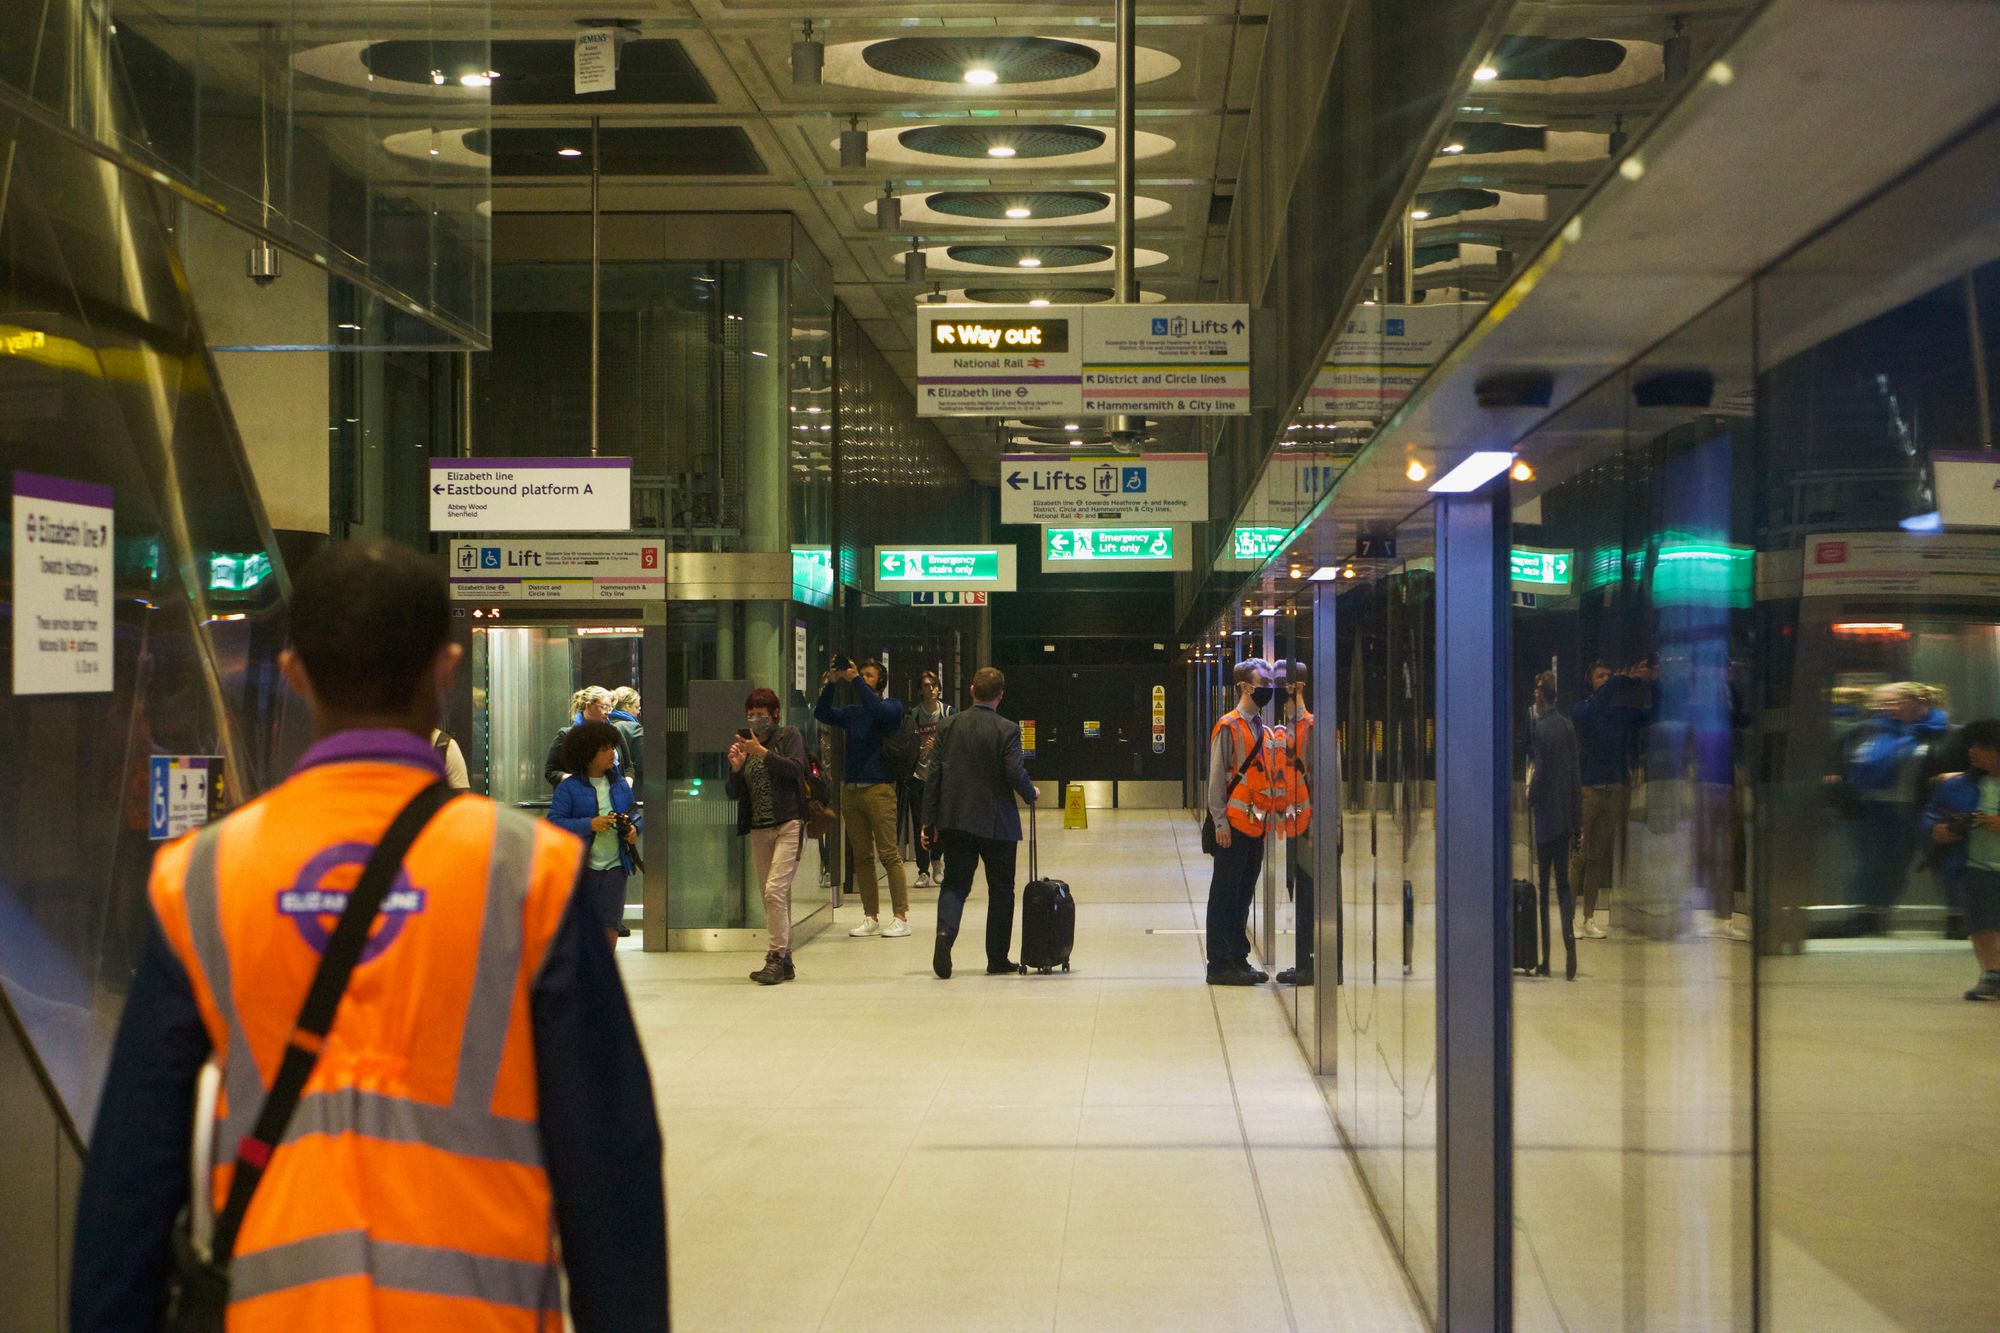 The Elizabeth Line platform at Paddington, with people getting into a lift. A platform assistant pokes his head inside the doors to check inside a terminating train.